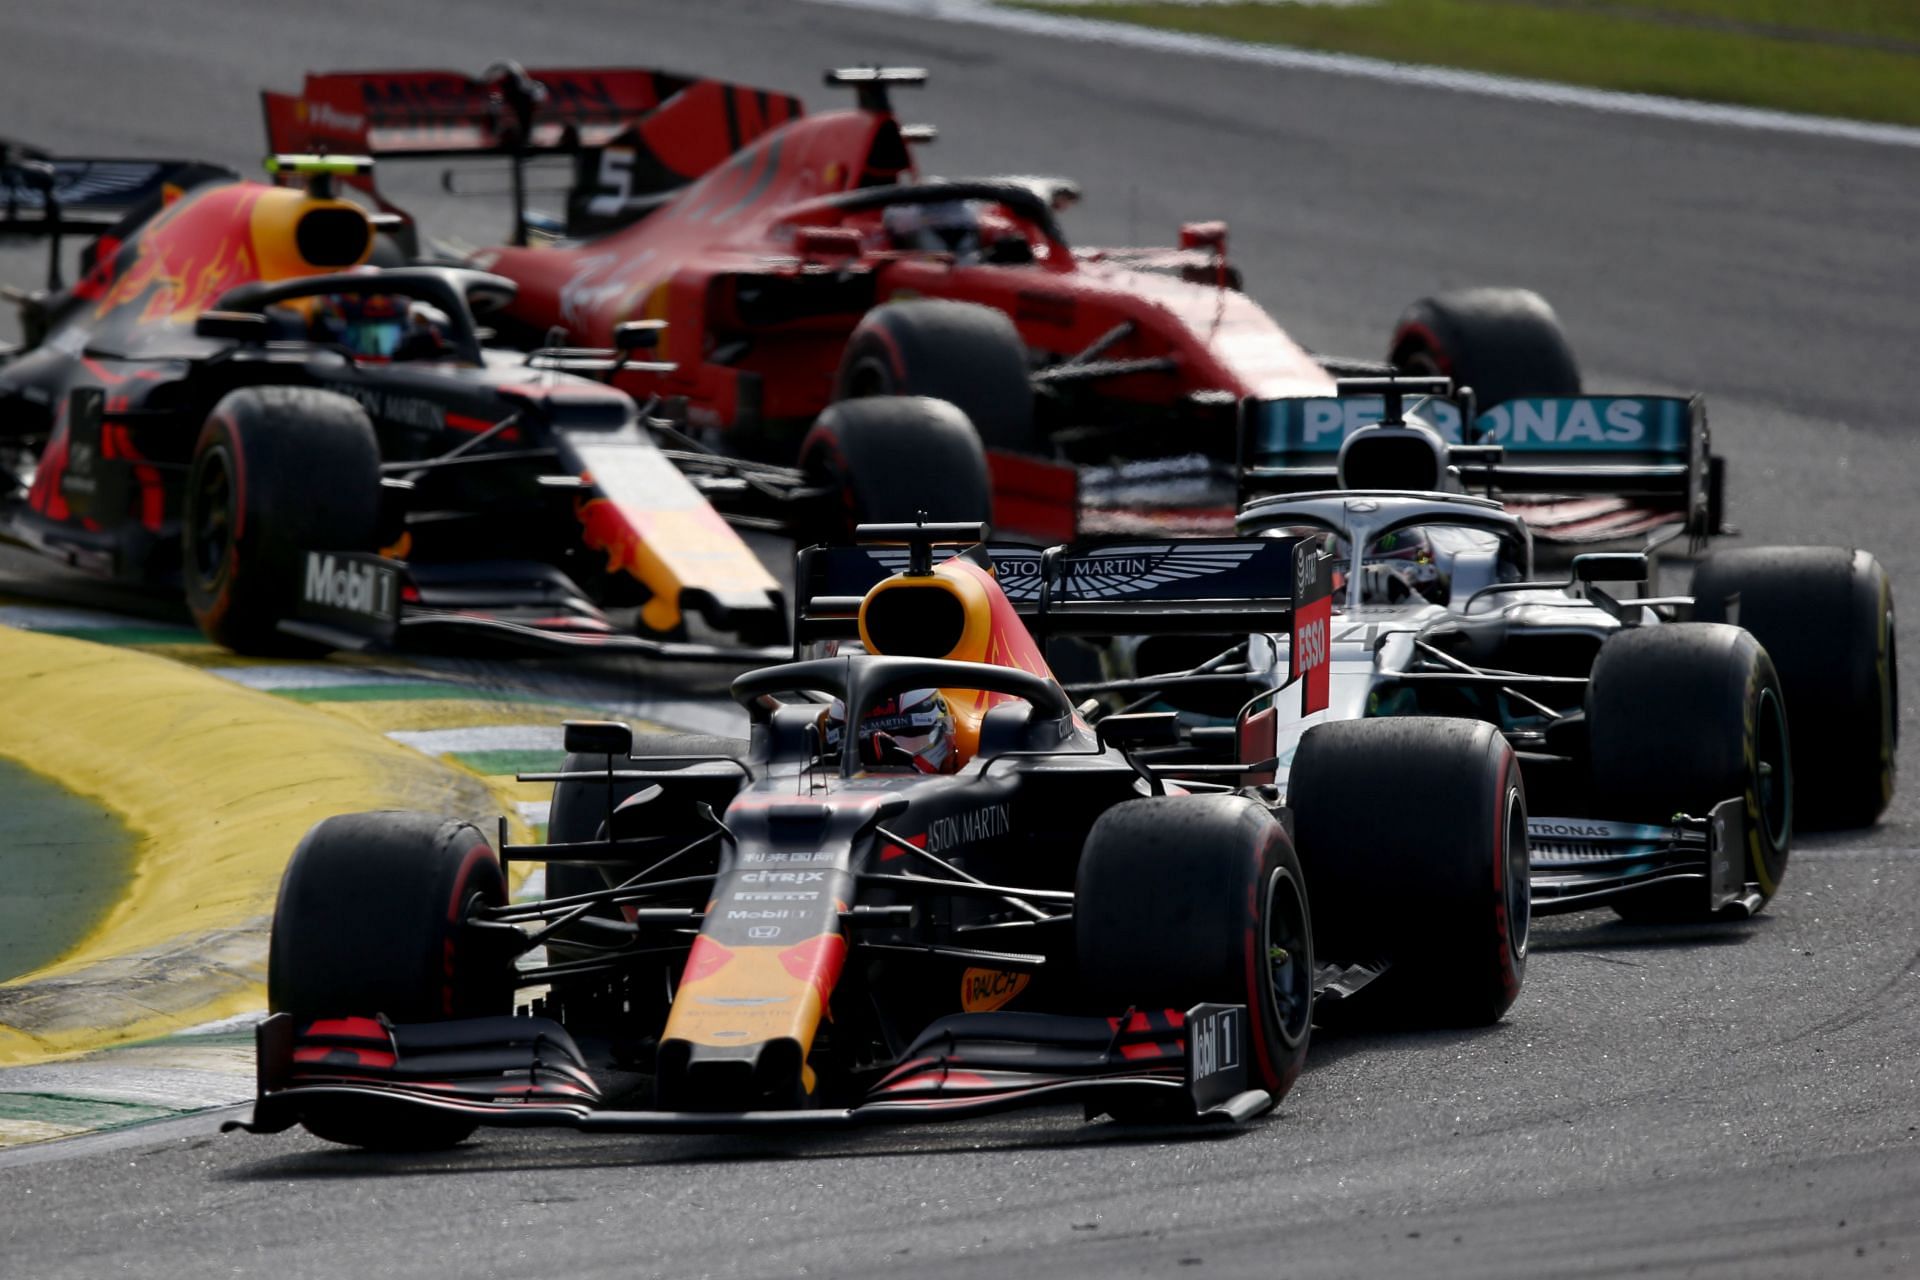 Max Verstappen leading the 2019 Brazil GP (Photo by Charles Coates/Getty Images)